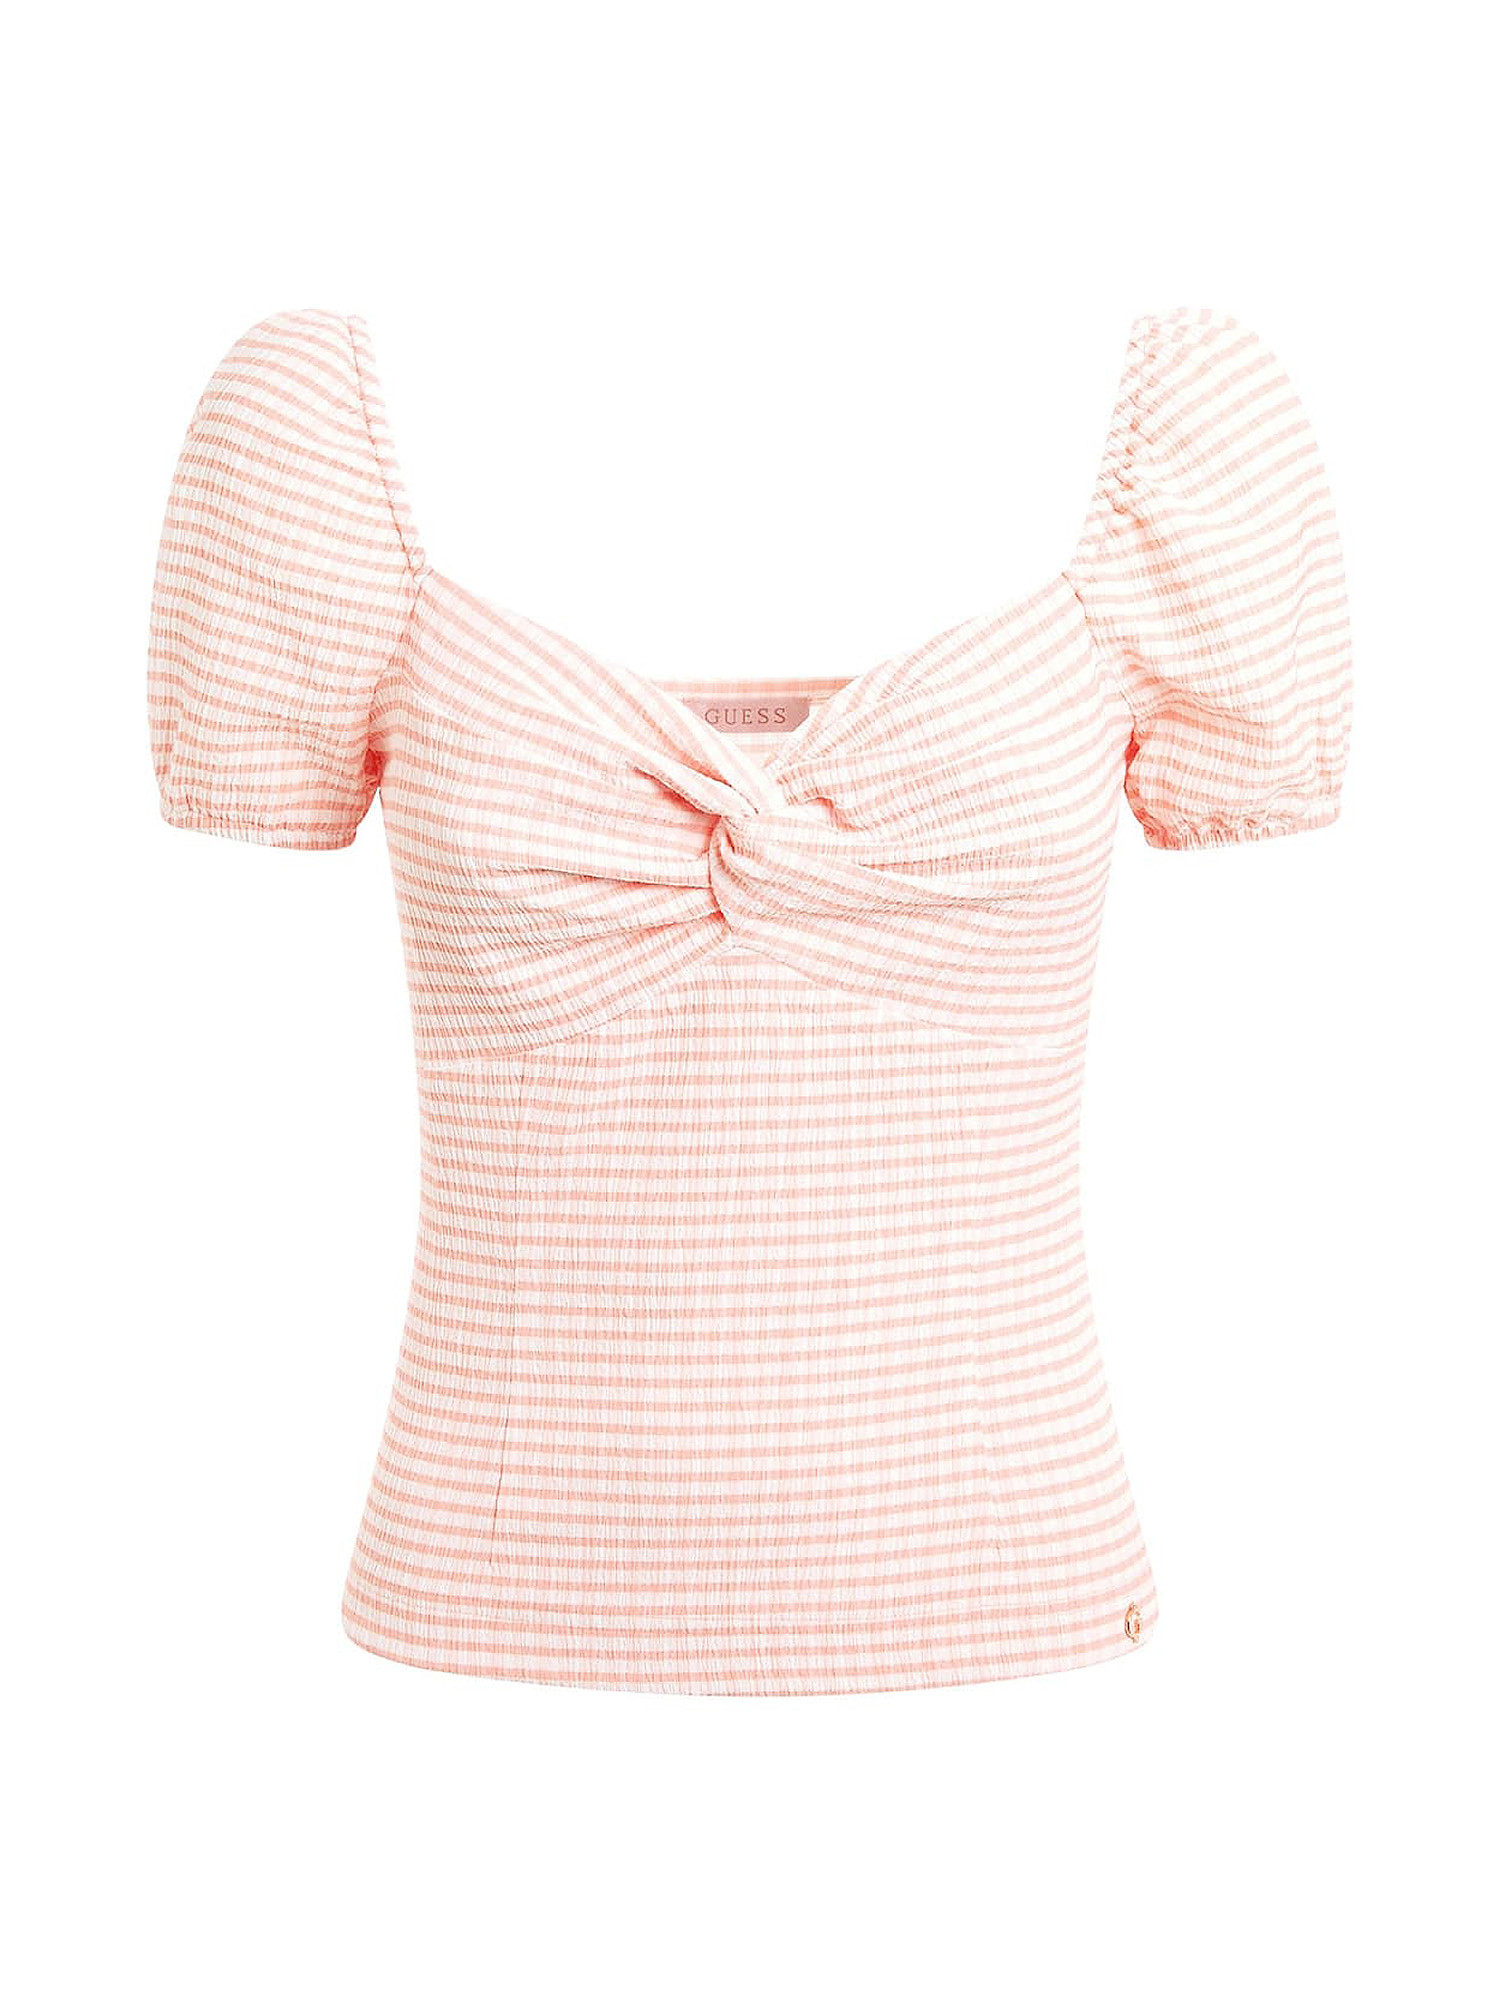 GUESS - Top a fantasia vichy, Rosa, large image number 0